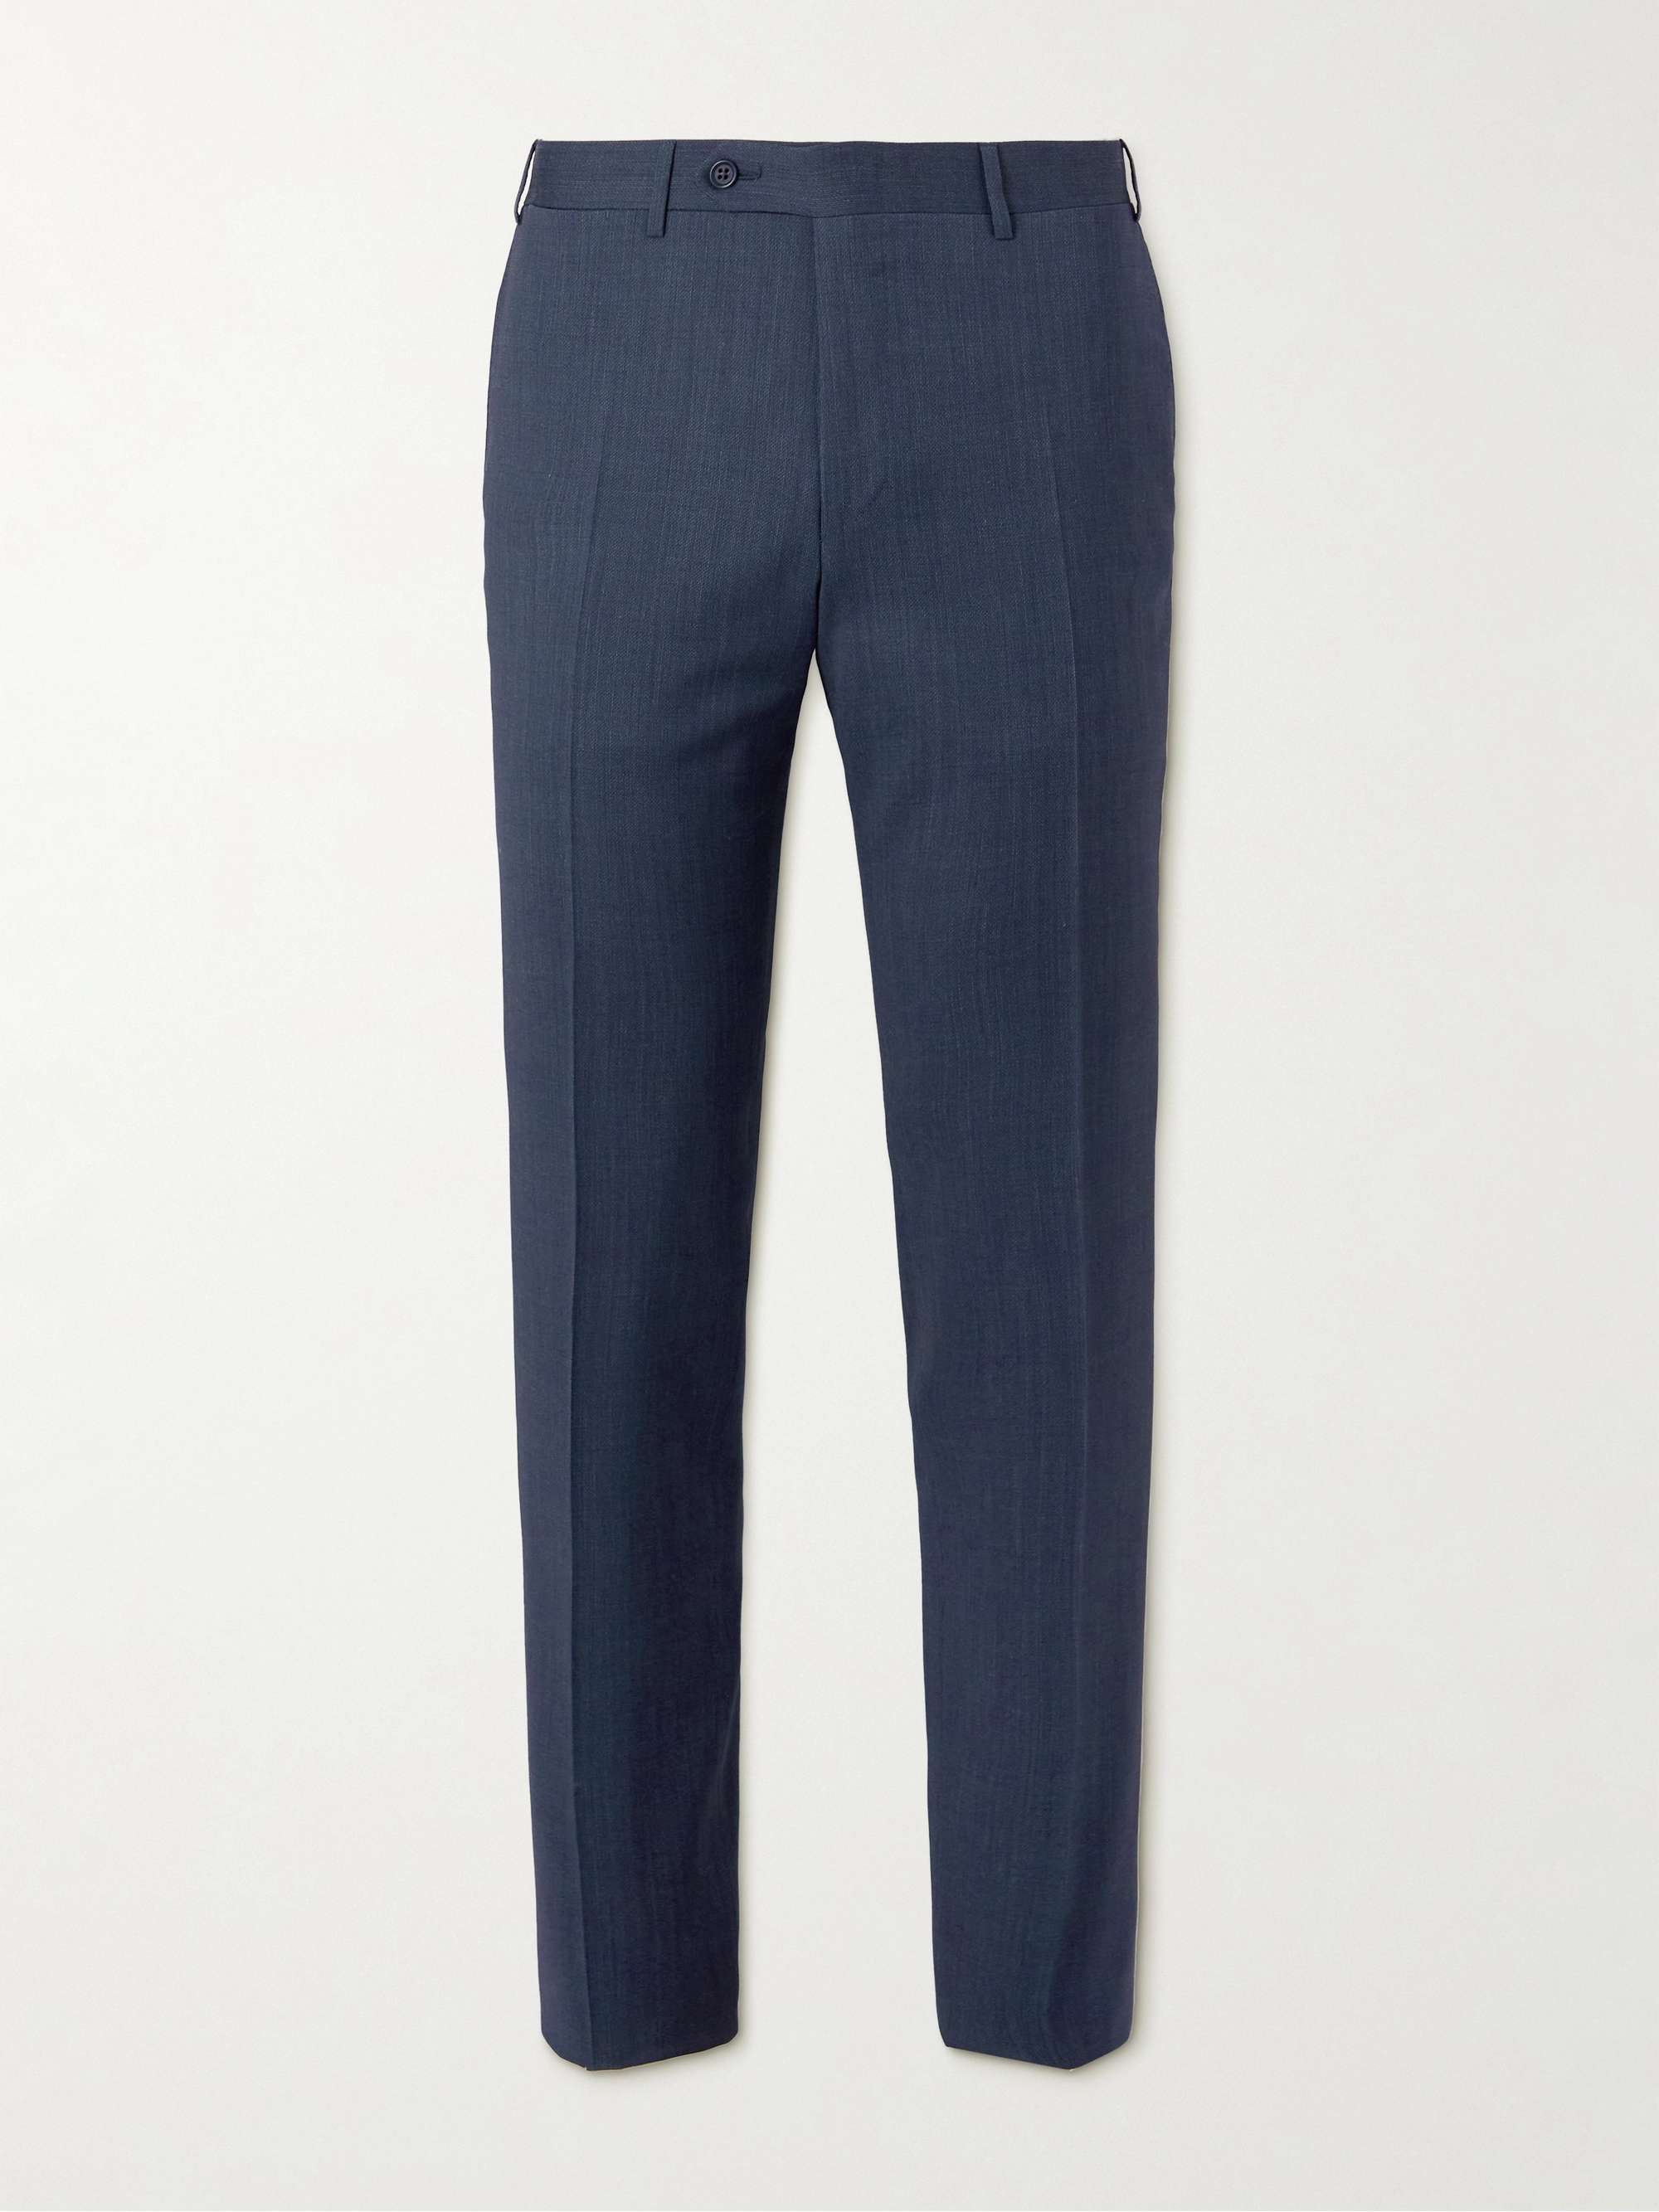 Skinny Fit Stretch Suit Pants in Charcoal | Hallensteins NZ